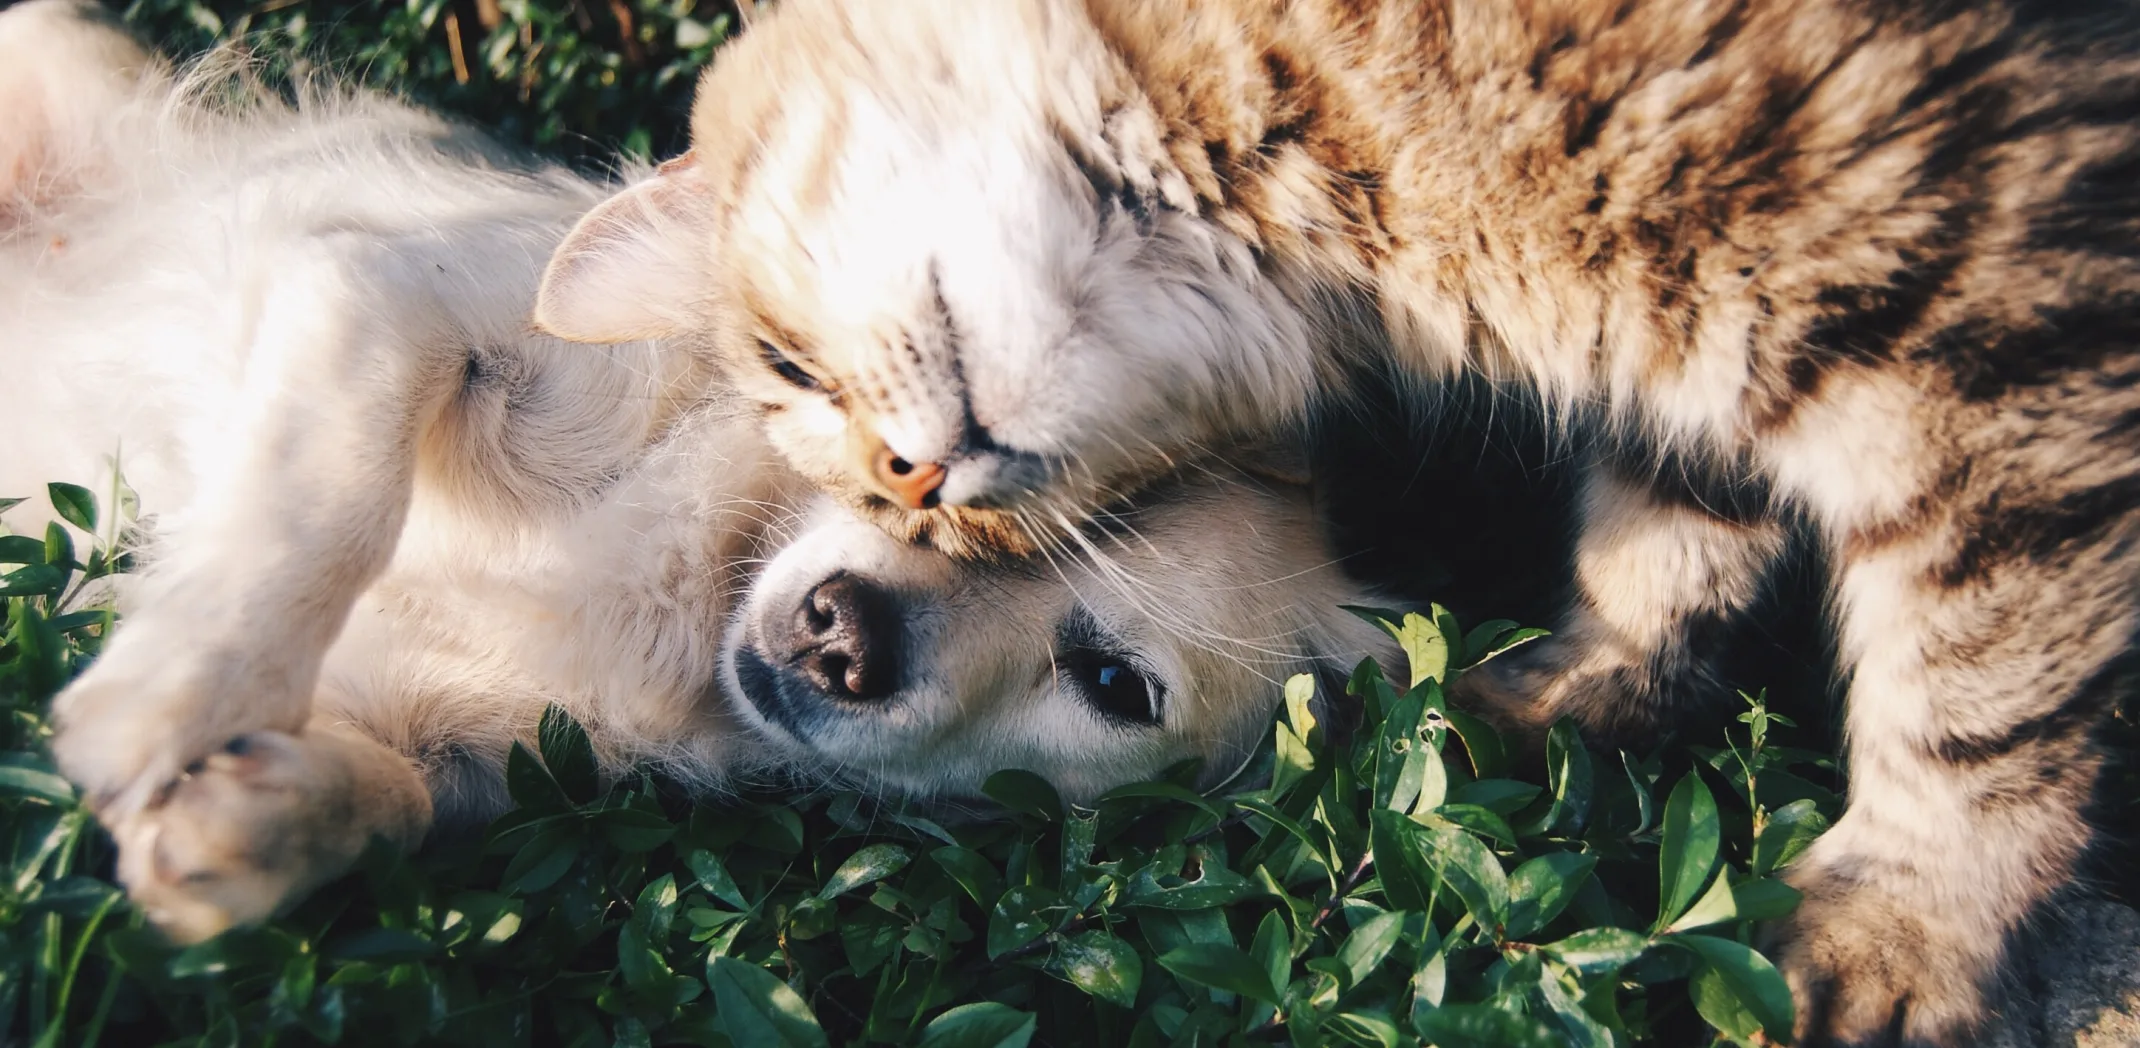 Dog and cat snuggling in the grass.